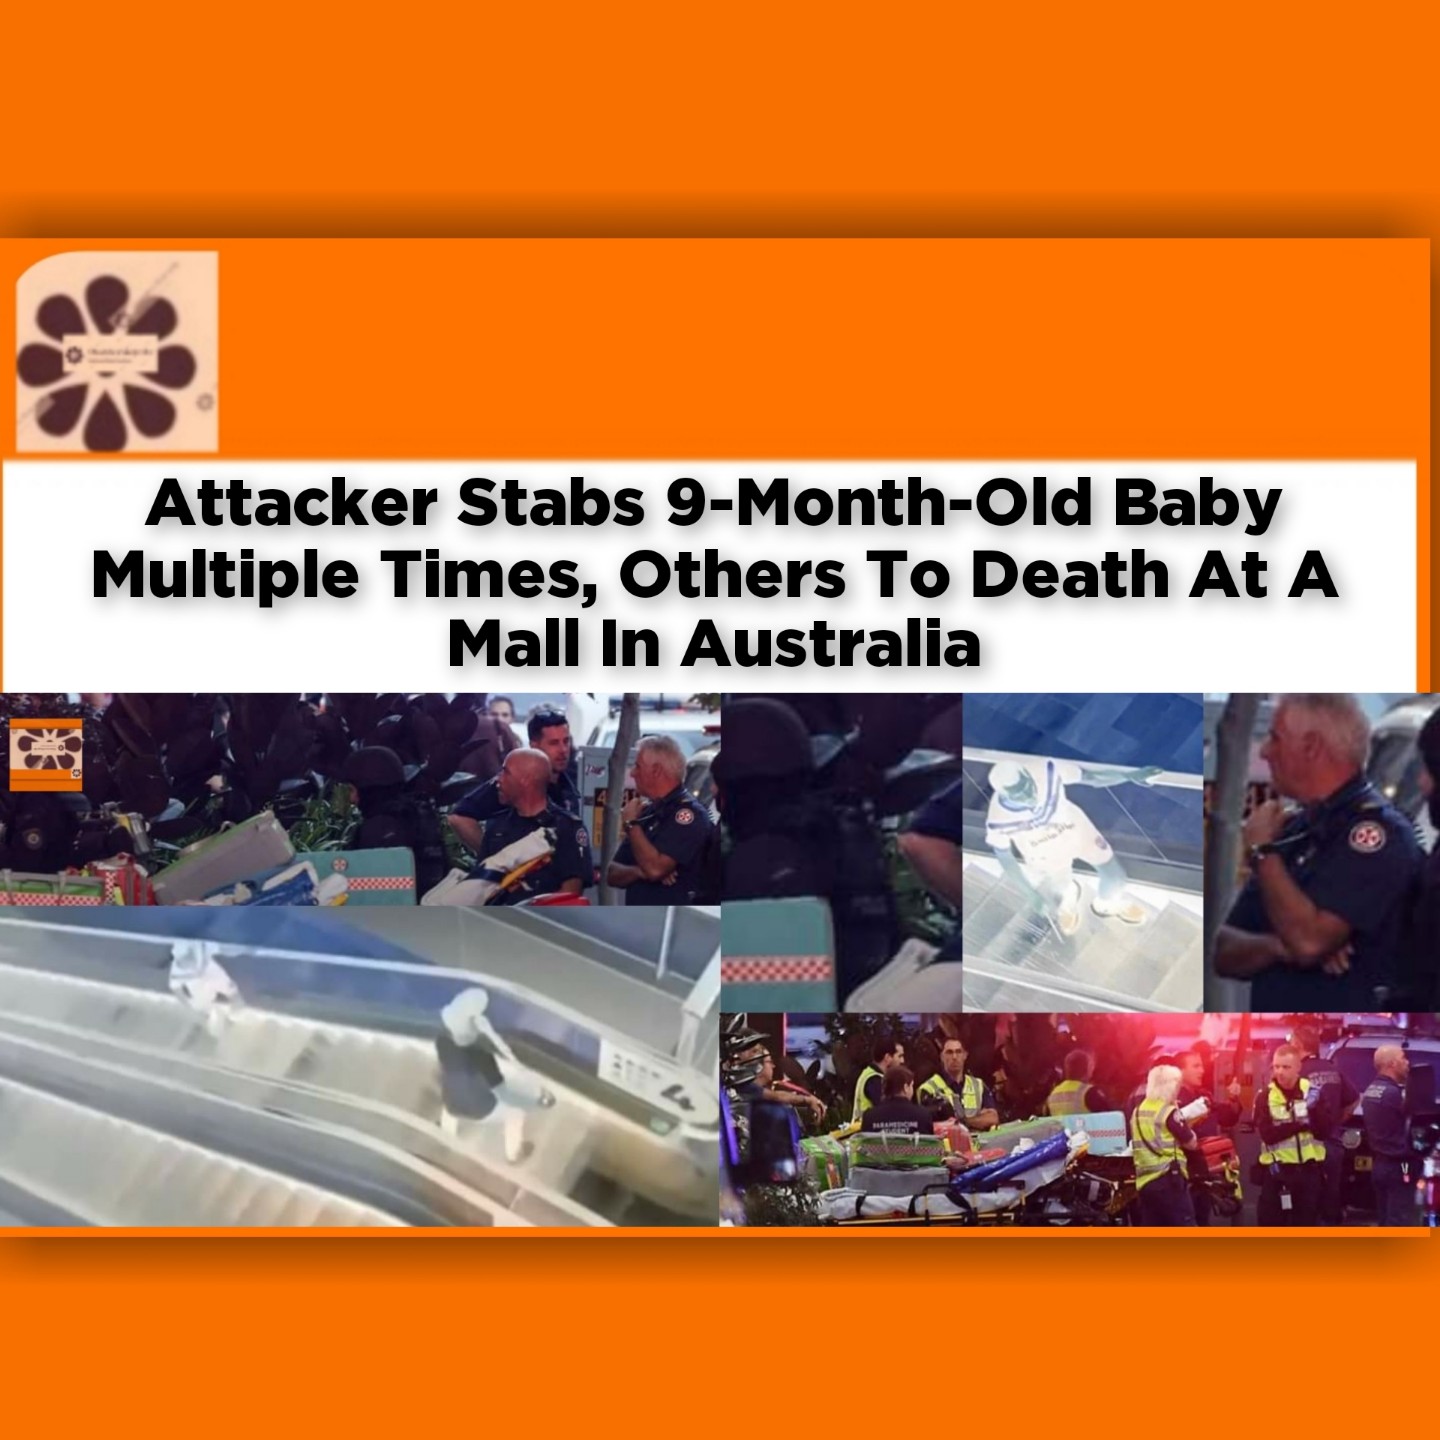 Attacker Stabs 9-Month-Old Baby Multiple Times, Others To Death At A Mall In Australia ~ OsazuwaAkonedo #Treason